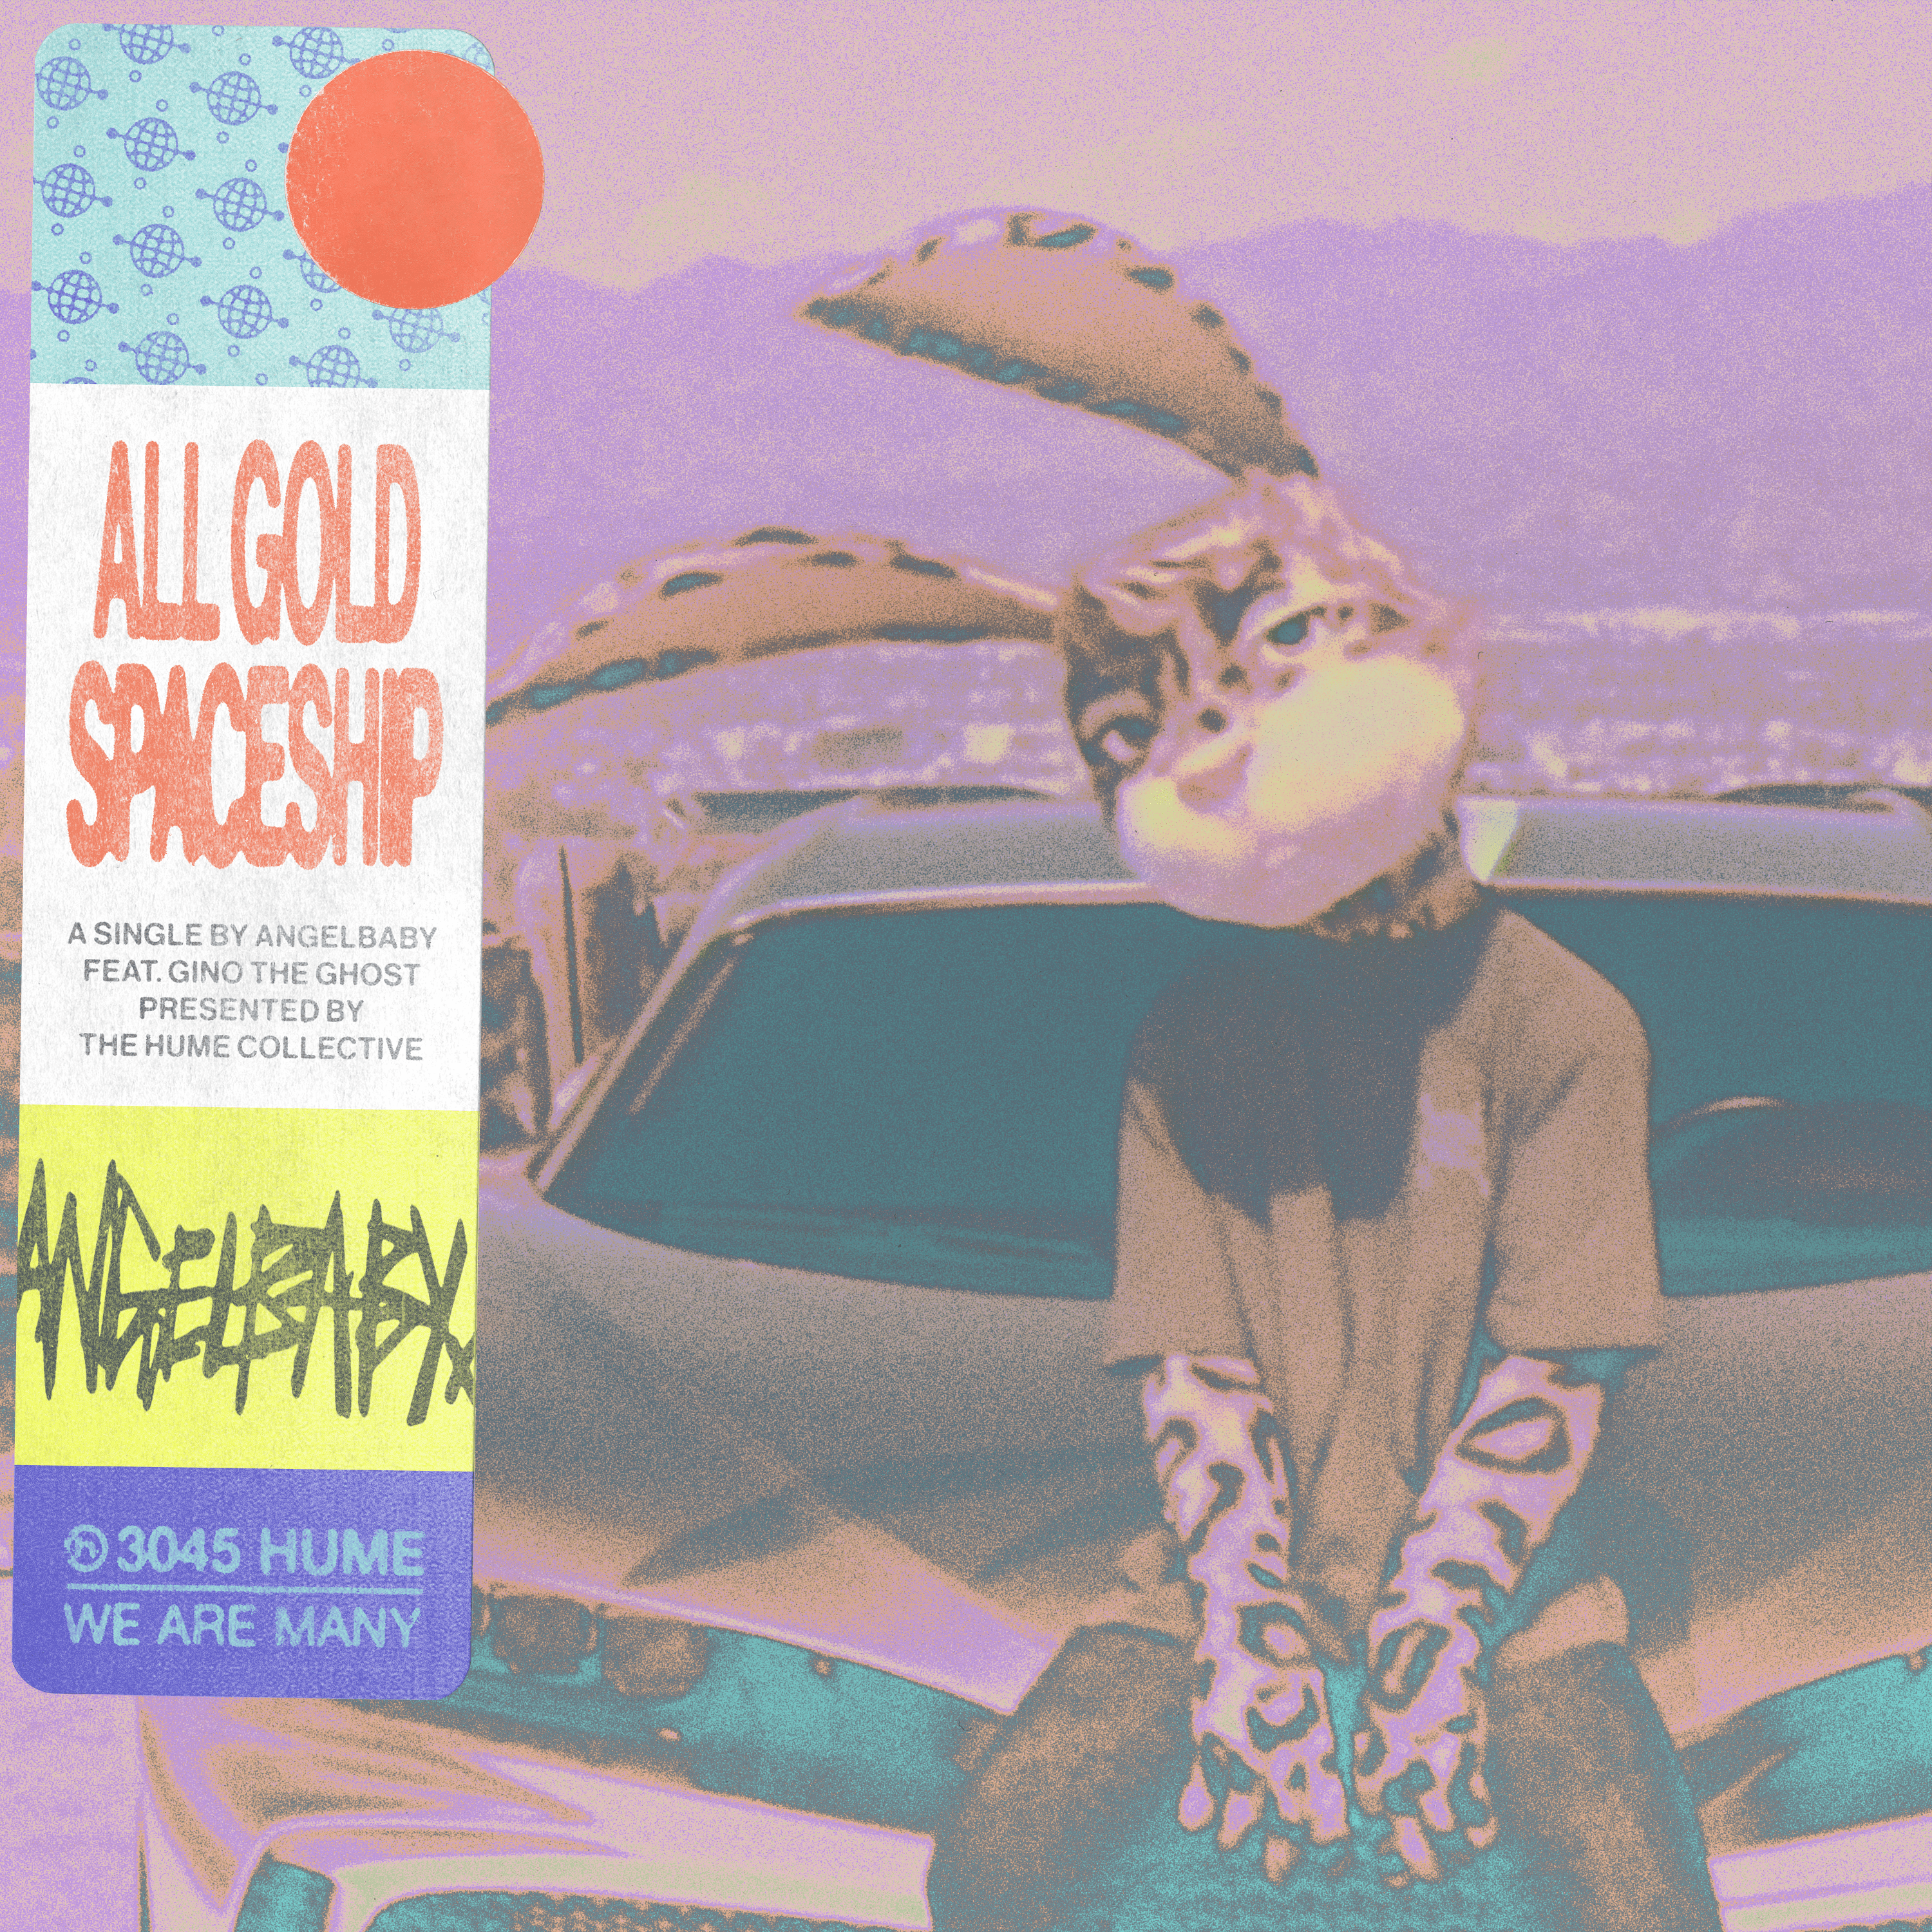 All Gold Spaceship #65